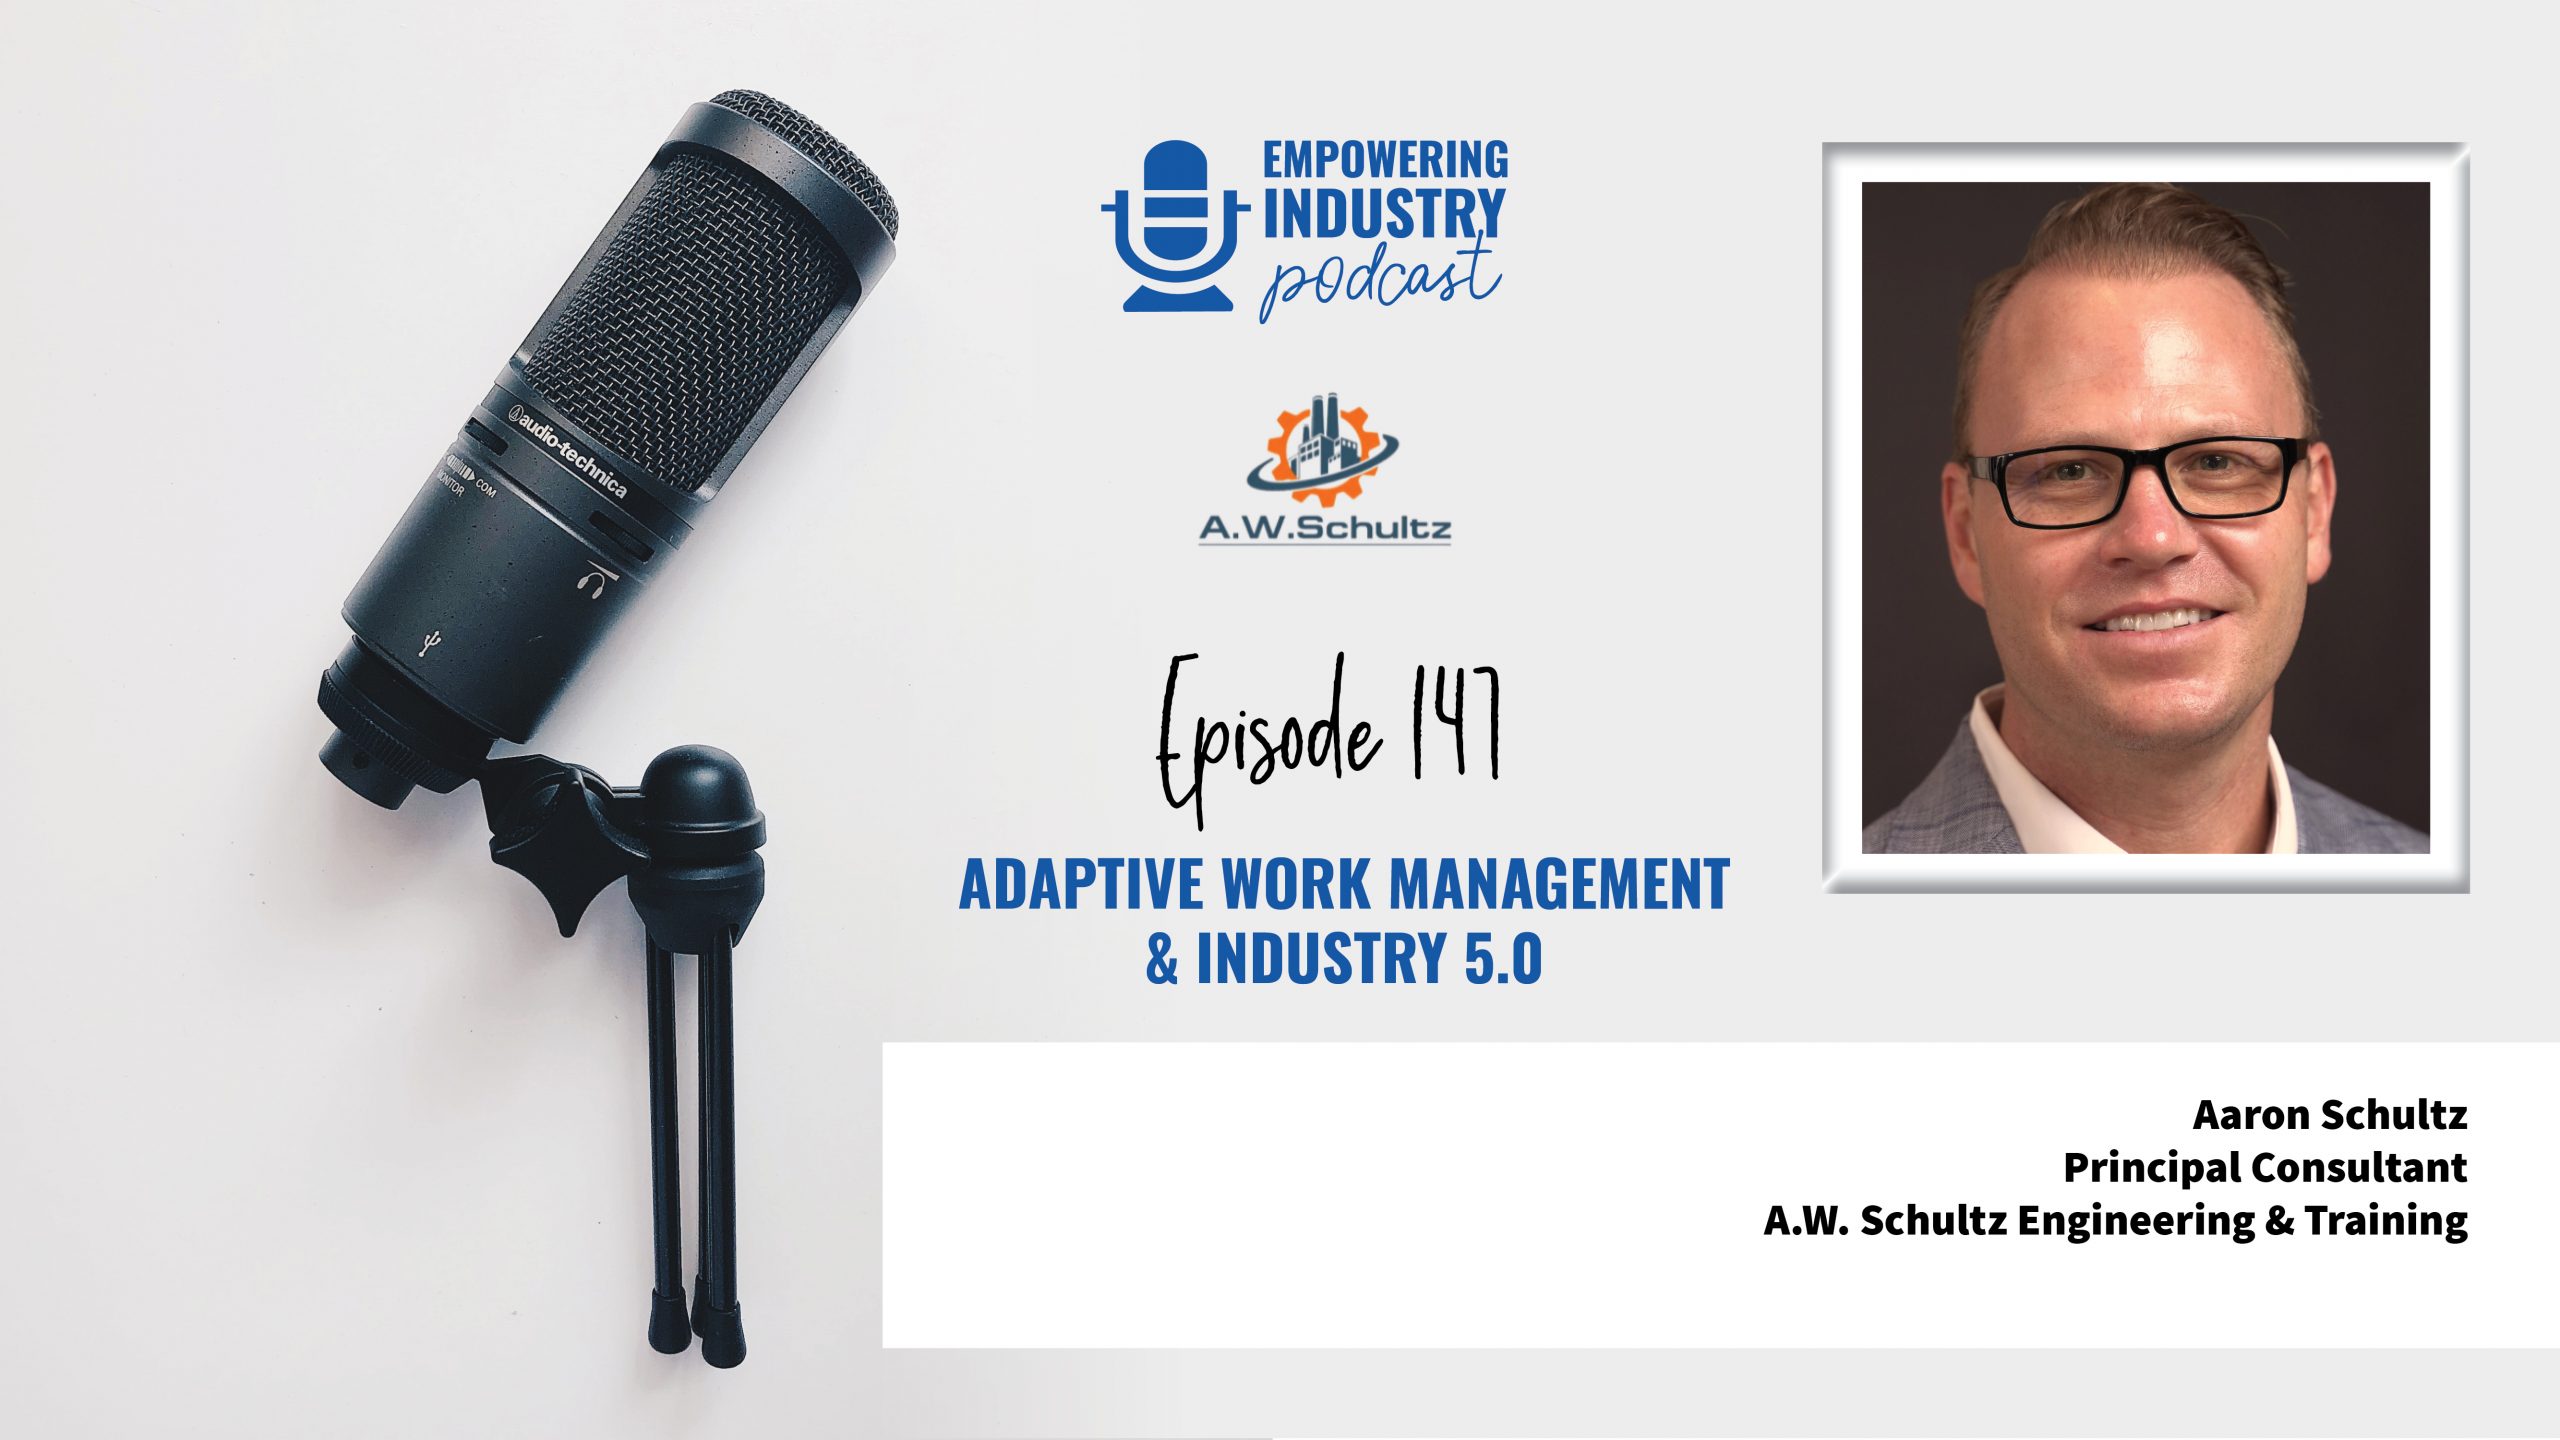 Adaptive Work Management & Industry 5.0 with Aaron Schultz